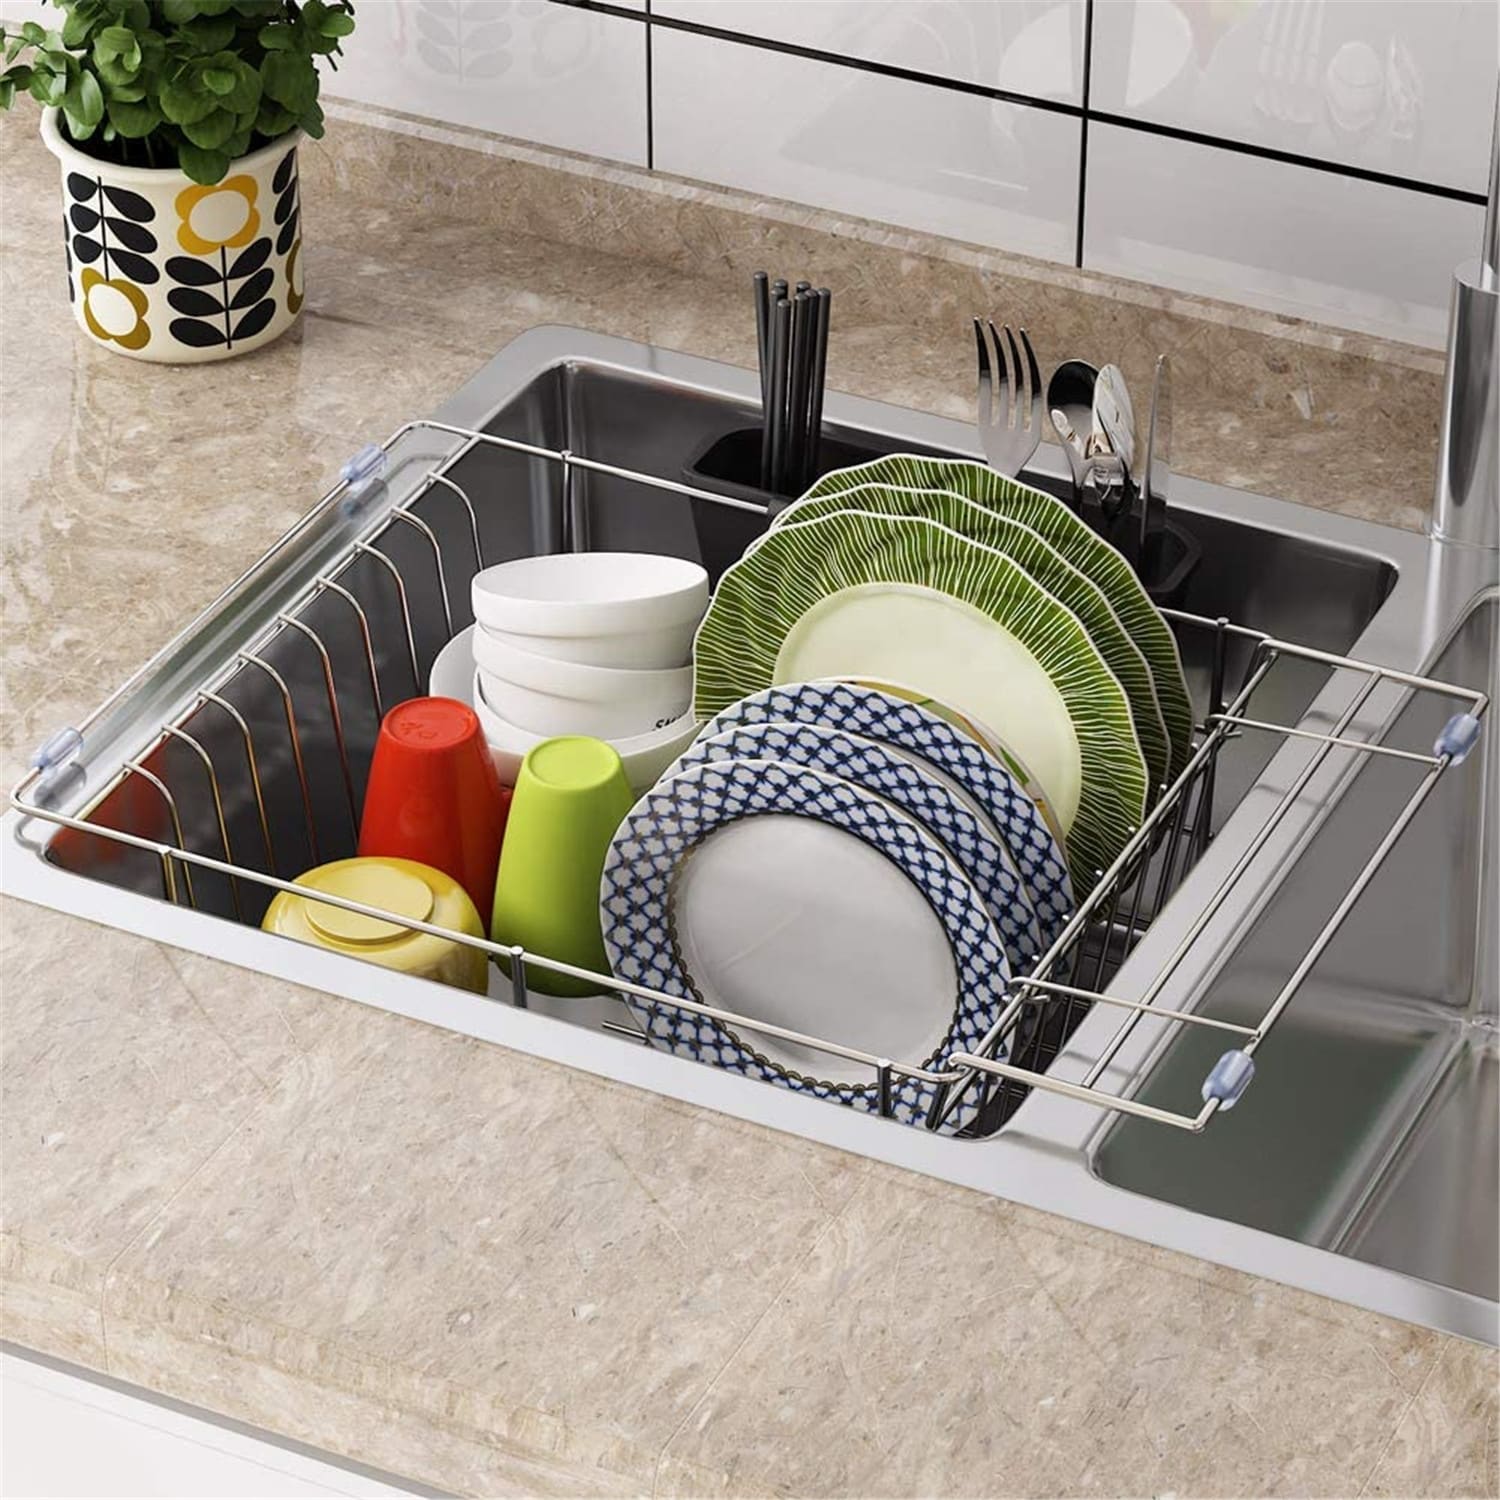 Dish Drying Rack, Expandable Over The Sink Dish Drainer